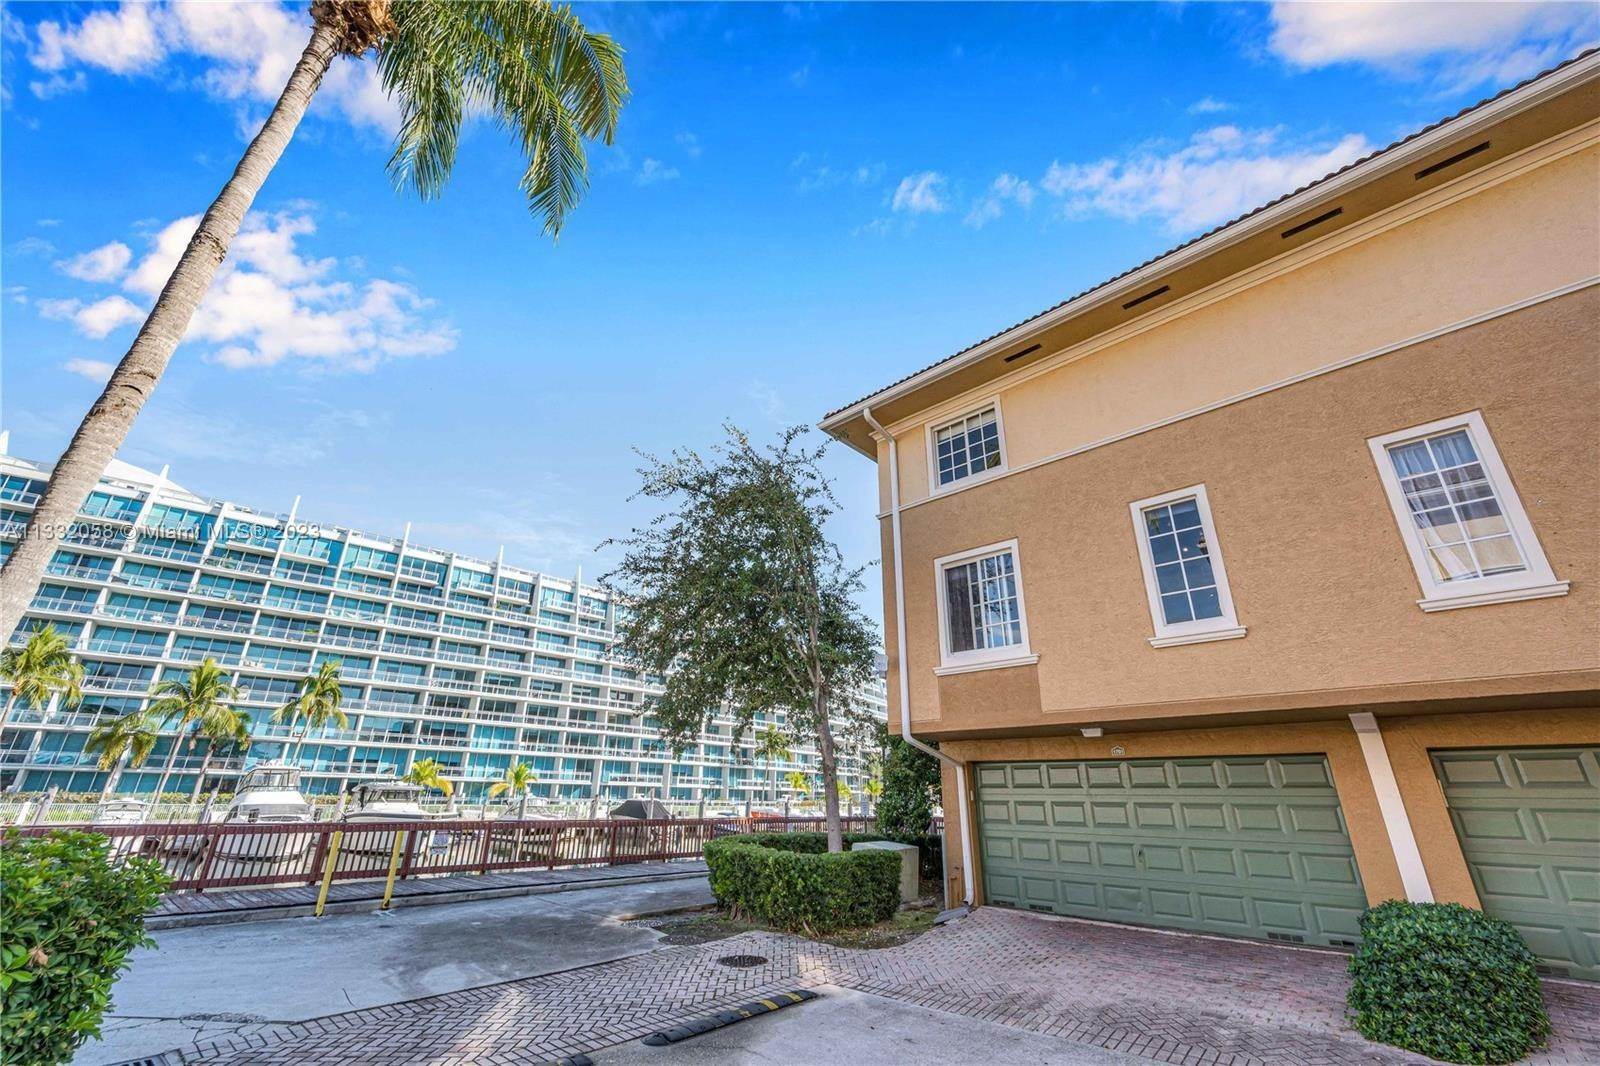 11. Townhouse for Sale at Aventura, FL 33180